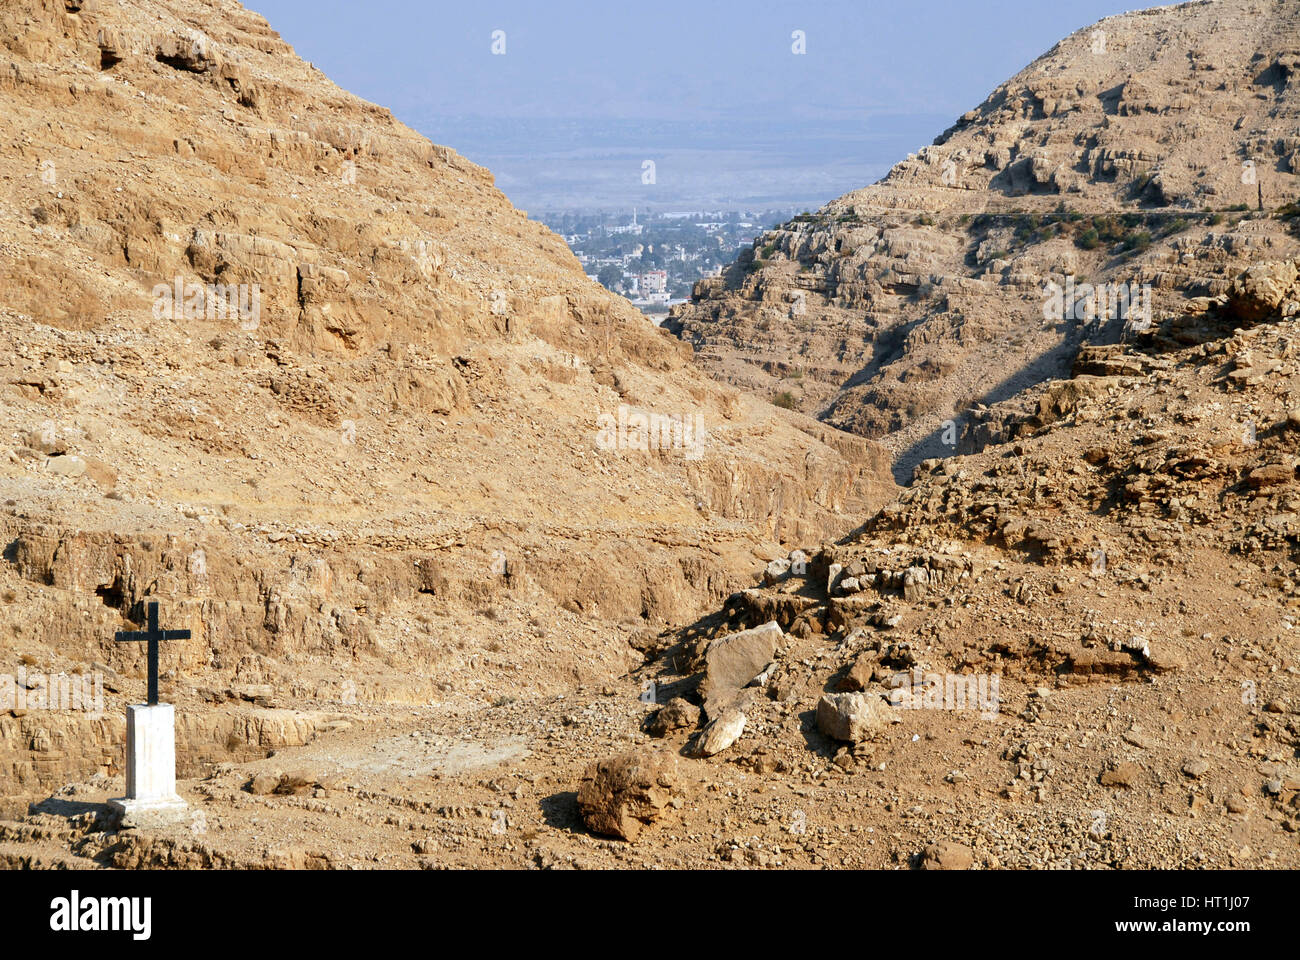 Wadi Qelt is a valley running west to east across the Judean desert in the West Bank, in the background the city of Jericho, Palestine West Jordan Lan Stock Photo